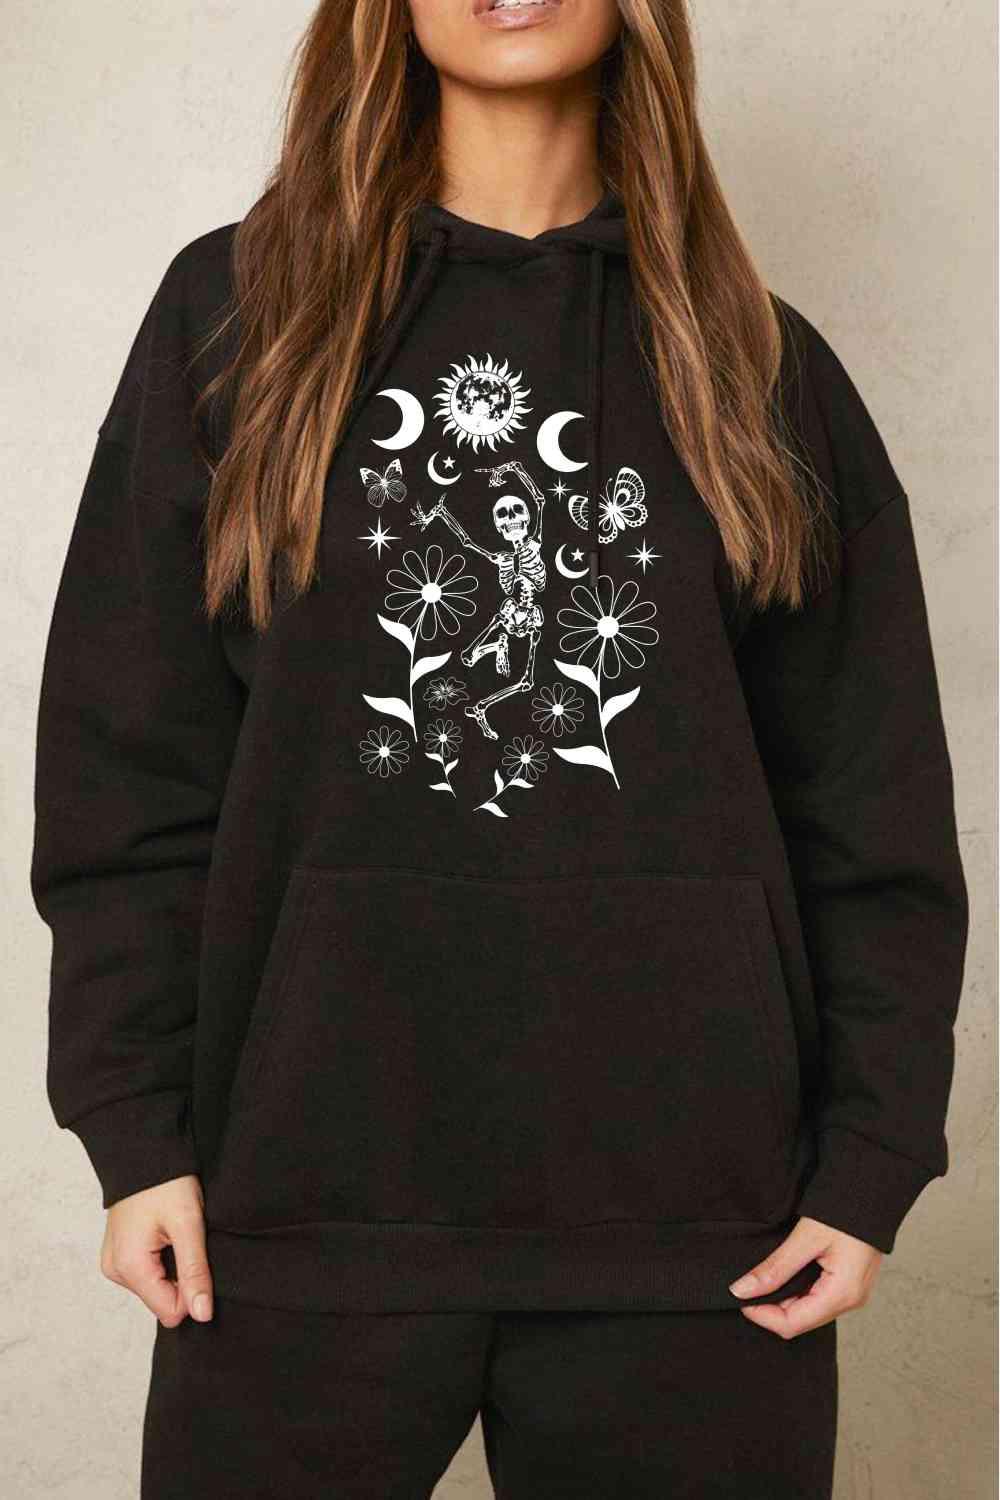 Simply Love Simply Love Full Size Dancing Skeleton Graphic Hoodie - Immenzive